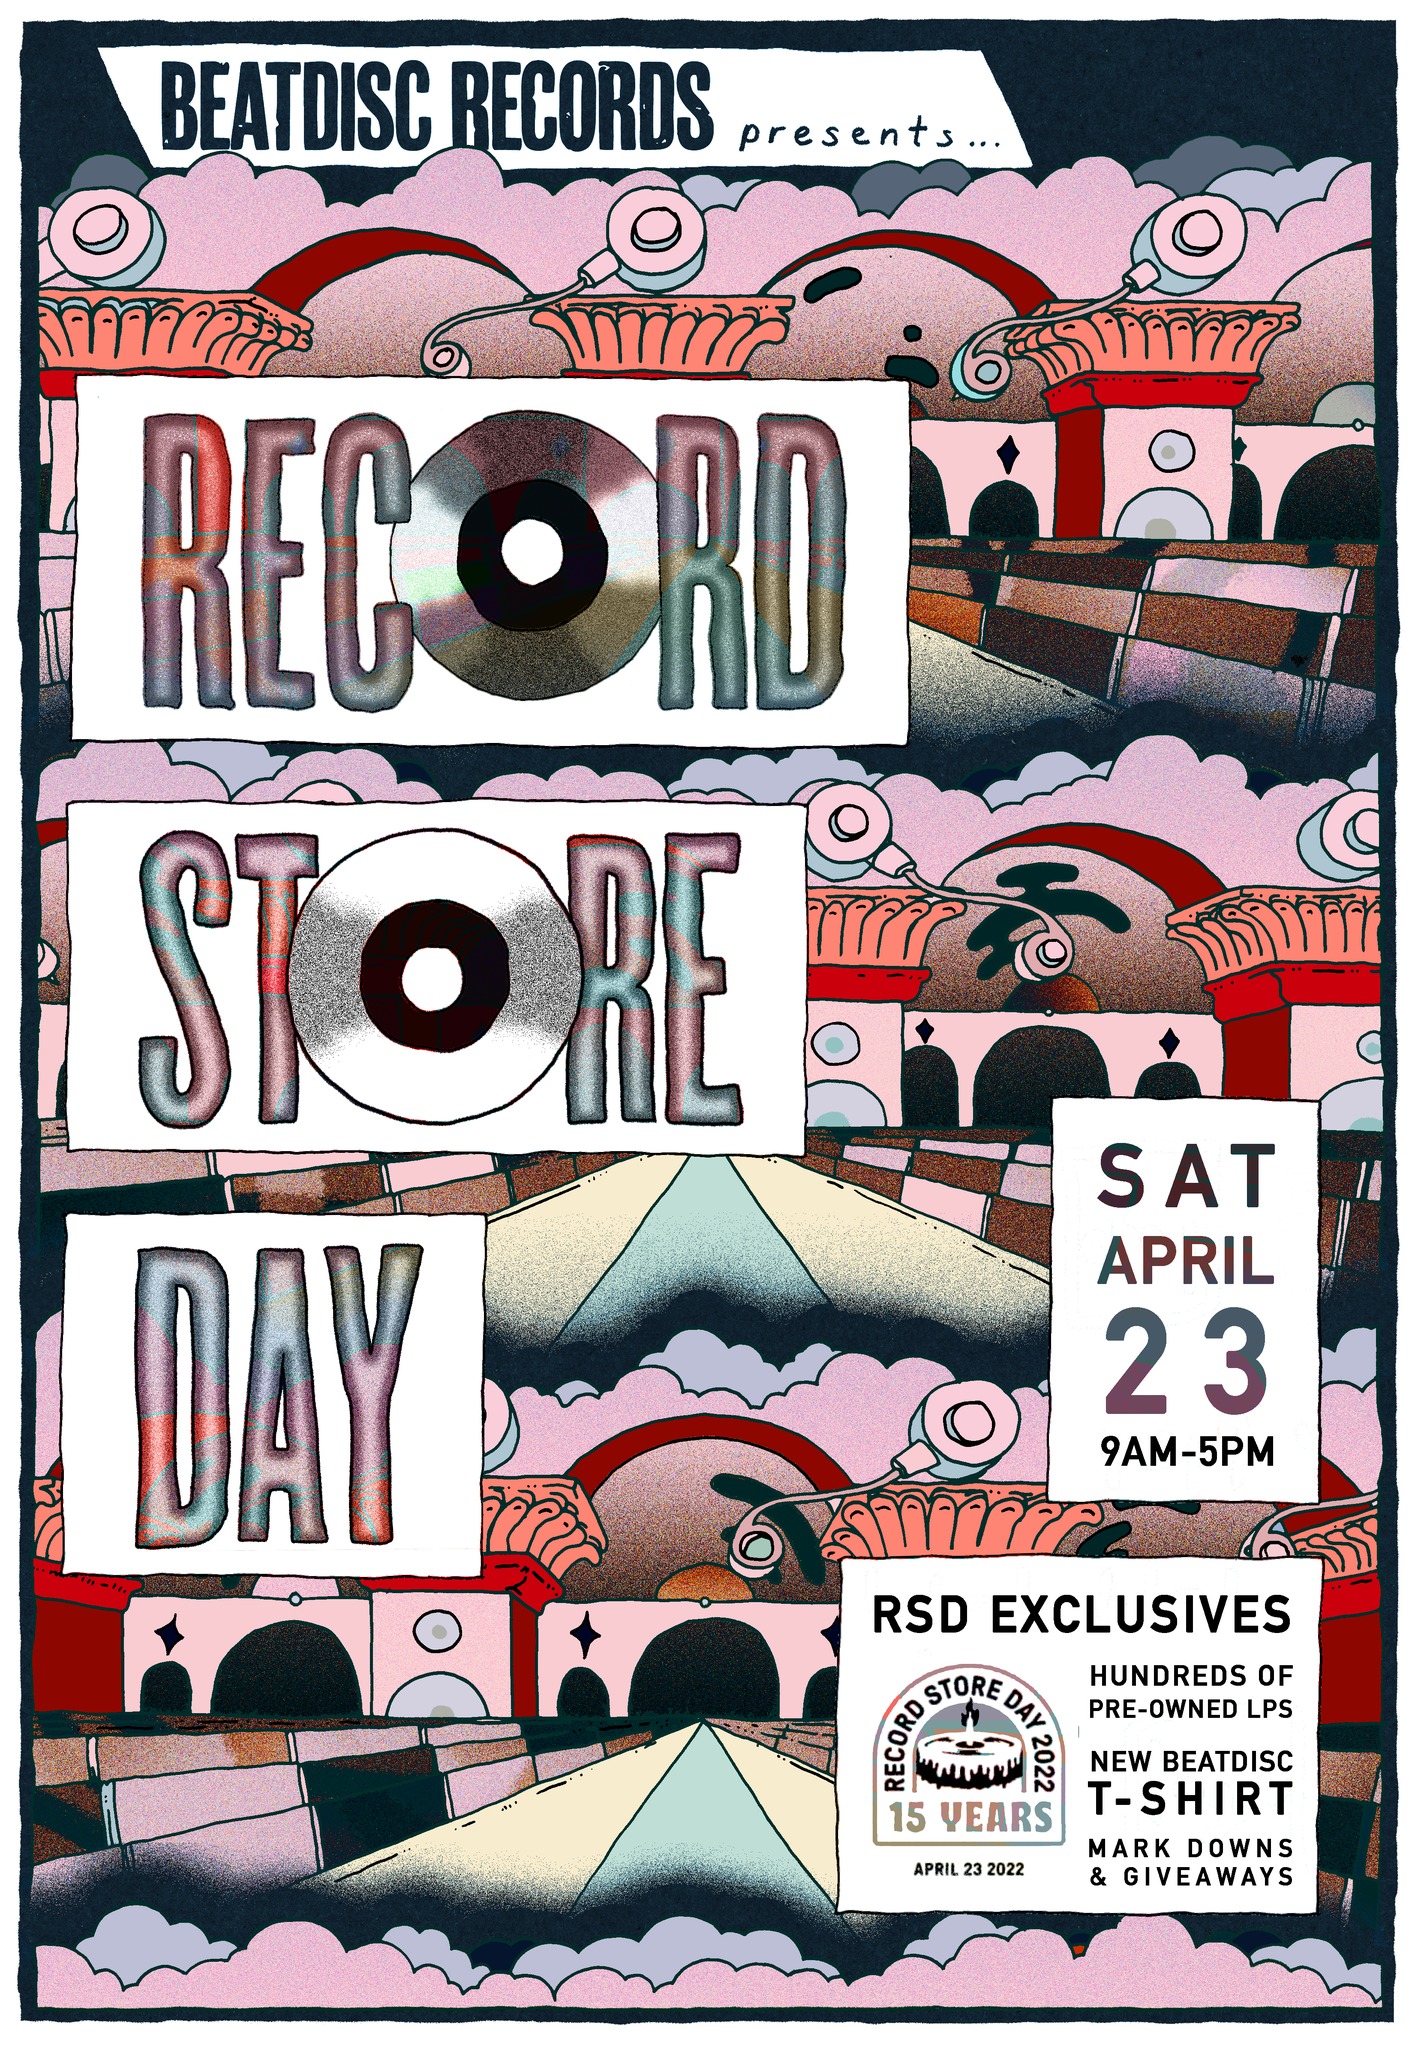 What's on Your Local? NSW Edition - Record Store Day Australia